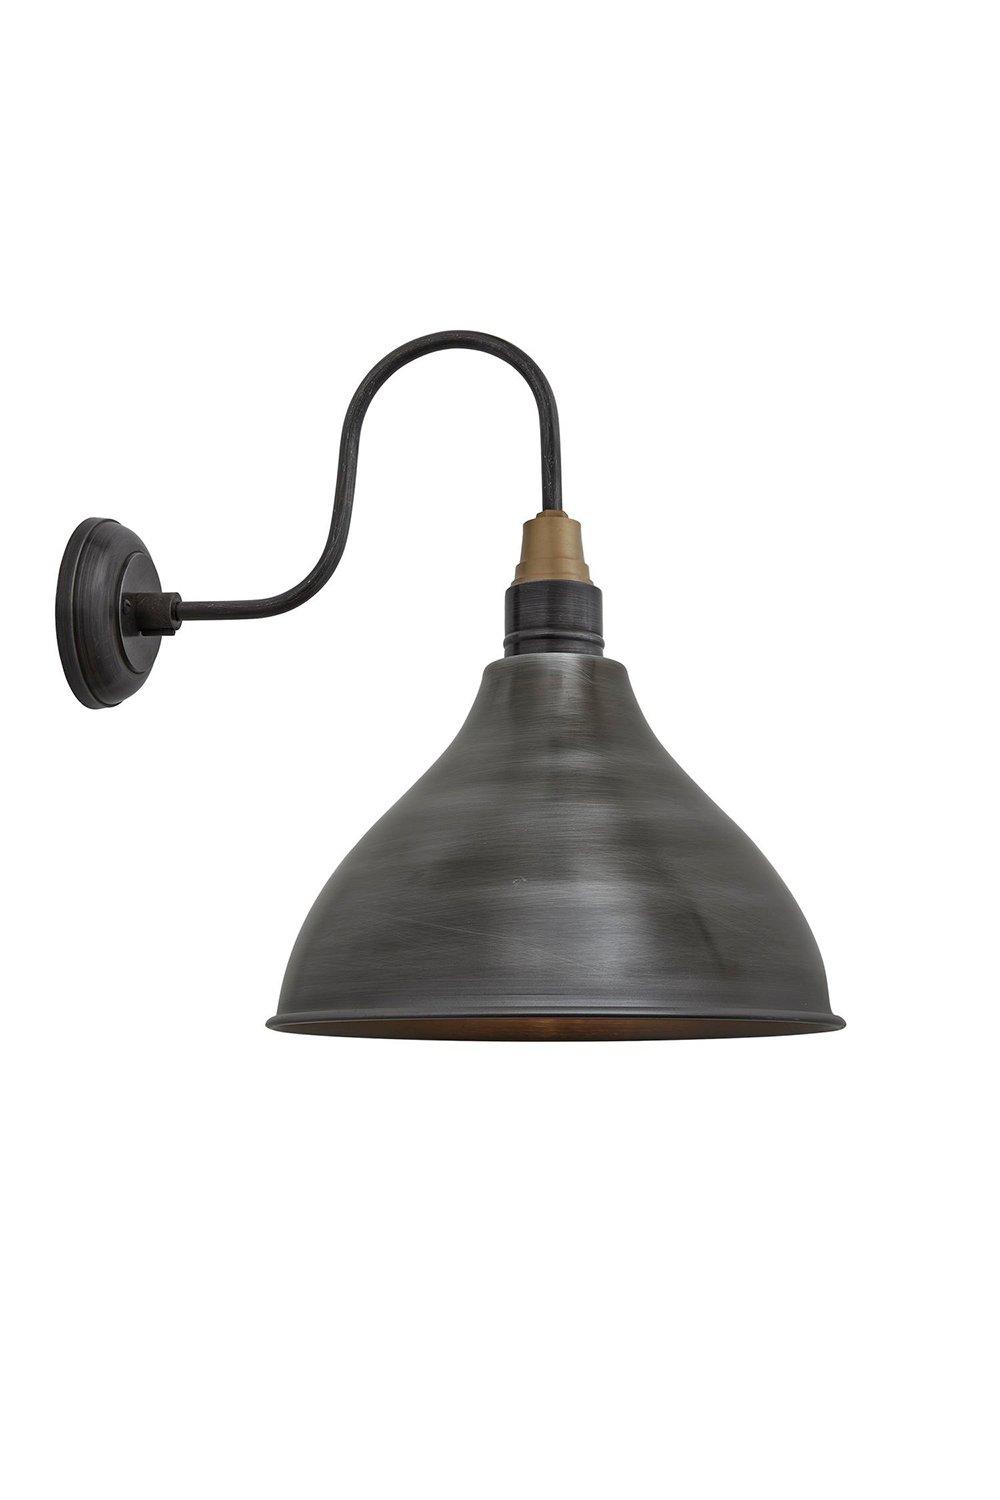 Swan Neck Cone Wall Light, 12 Inch, Pewter, Pewter Holder